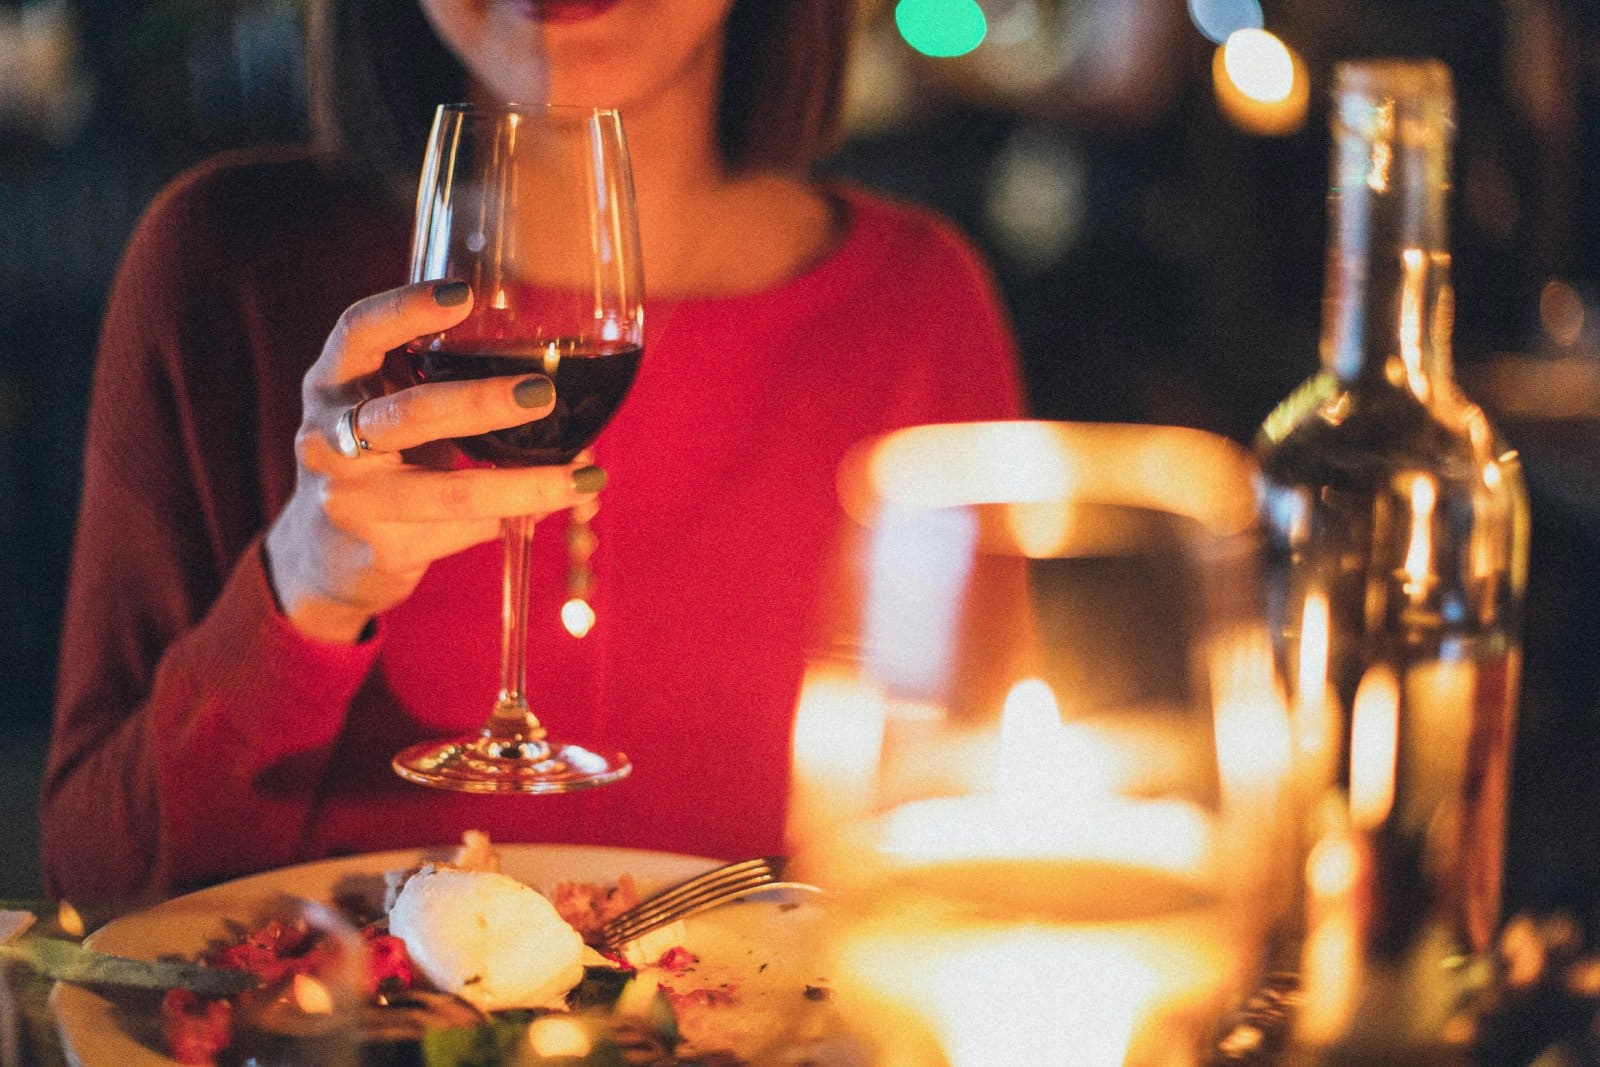 Image Credit: Pexels / Elina Sazonova <p><span>Dinner in Italy is a more relaxed affair compared to lunch, with lighter dishes and smaller portions. It often begins with an aperitivo, a pre-dinner drink enjoyed with friends and family to stimulate the appetite. This is followed by a light meal, such as pizza, bruschetta, or a simple pasta dish. Italians prefer to dine al fresco during the warmer months, enjoying the cool evening breeze and the company of loved ones.</span></p>